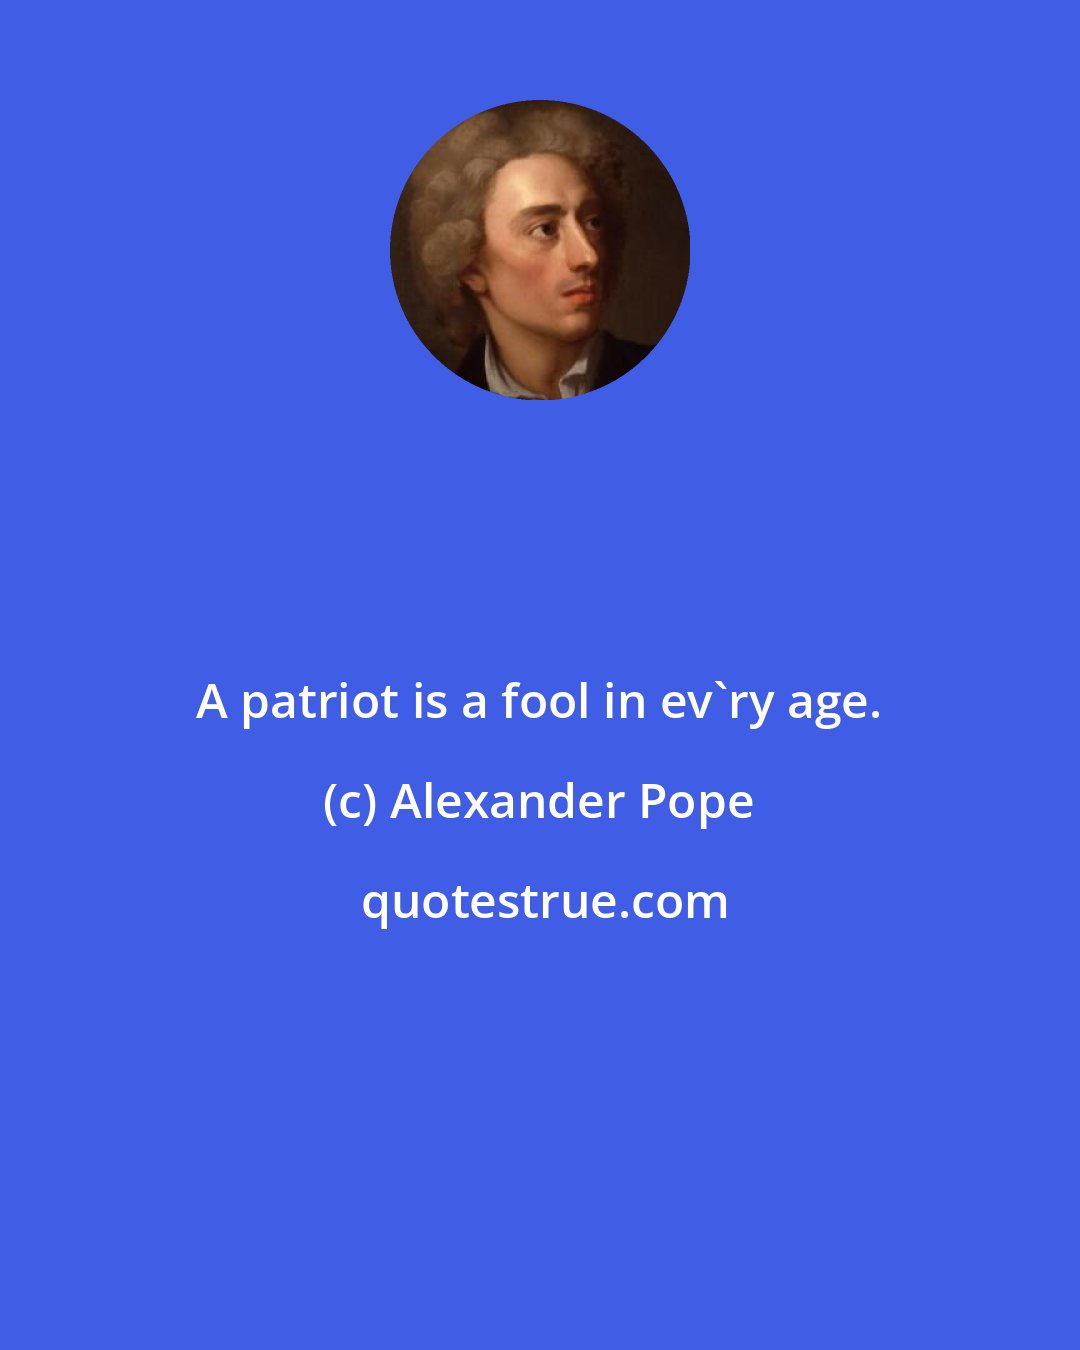 Alexander Pope: A patriot is a fool in ev'ry age.